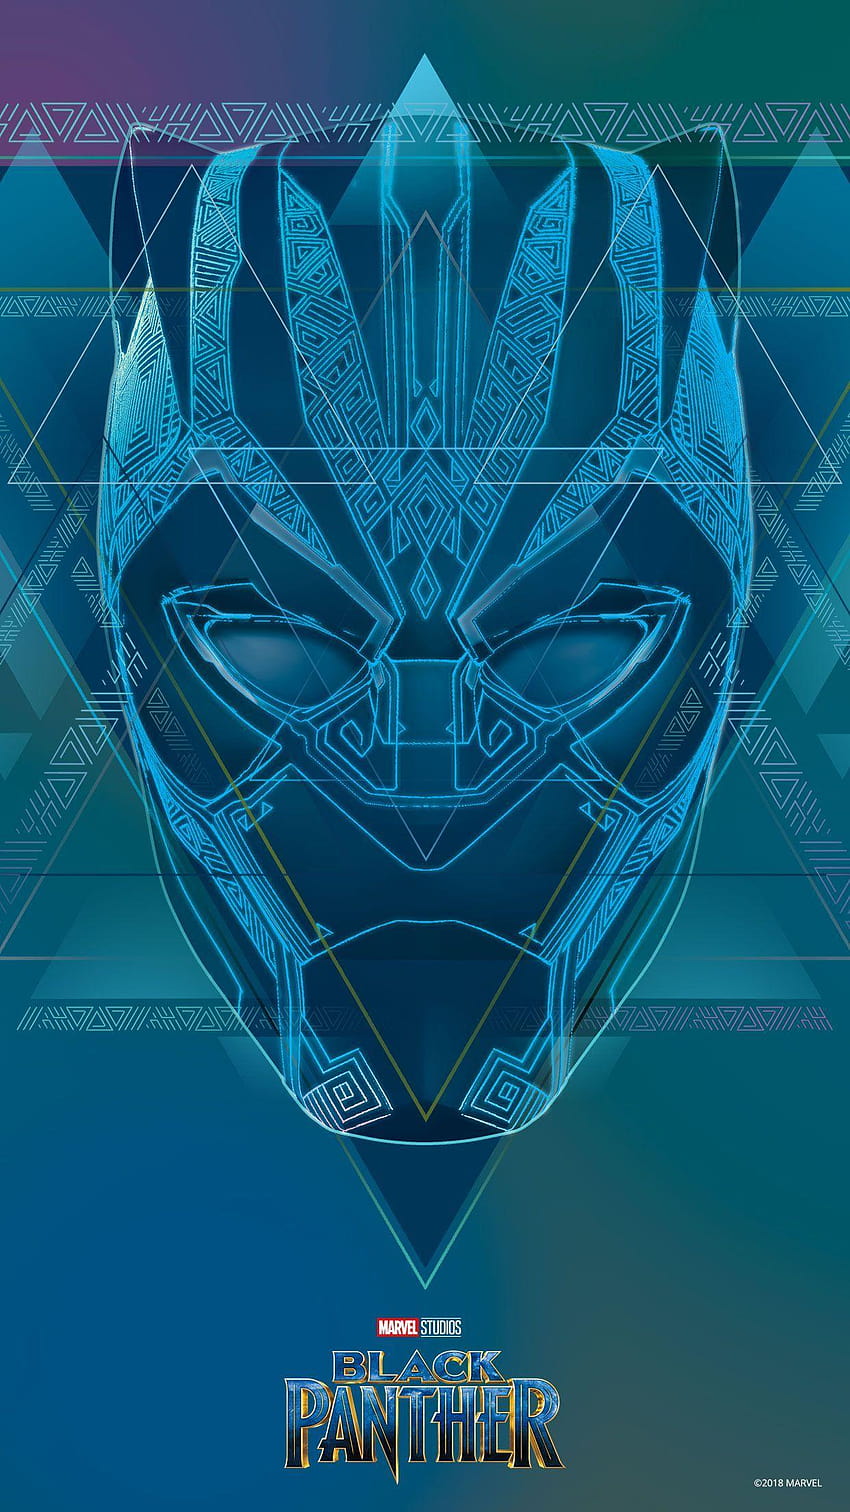 Keep it slick with these Black Panther mobile, black panther marvel mobile HD phone wallpaper